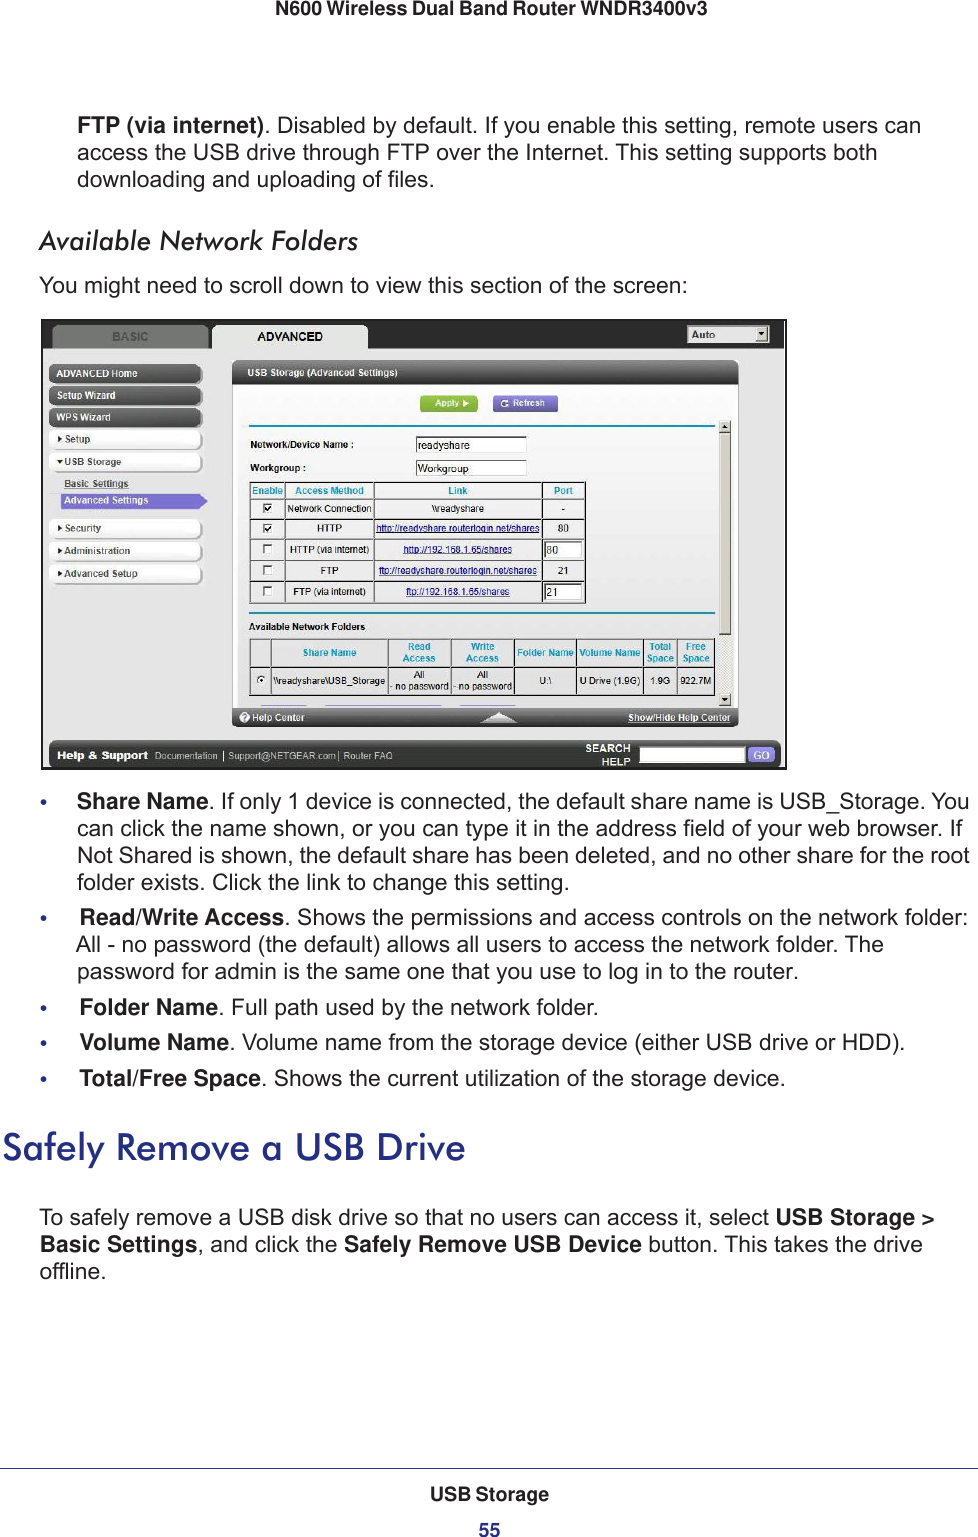 USB Storage55 N600 Wireless Dual Band Router WNDR3400v3FTP (via internet). Disabled by default. If you enable this setting, remote users can access the USB drive through FTP over the Internet. This setting supports both downloading and uploading of files.Available Network FoldersYou might need to scroll down to view this section of the screen:•     Share Name. If only 1 device is connected, the default share name is USB_Storage. You can click the name shown, or you can type it in the address field of your web browser. If Not Shared is shown, the default share has been deleted, and no other share for the root folder exists. Click the link to change this setting.•     Read/Write Access. Shows the permissions and access controls on the network folder: All - no password (the default) allows all users to access the network folder. The password for admin is the same one that you use to log in to the router.•     Folder Name. Full path used by the network folder. •     Volume Name. Volume name from the storage device (either USB drive or HDD).•     Total/Free Space. Shows the current utilization of the storage device.Safely Remove a USB DriveTo safely remove a USB disk drive so that no users can access it, select USB Storage &gt; Basic Settings, and click the Safely Remove USB Device button. This takes the drive offline.